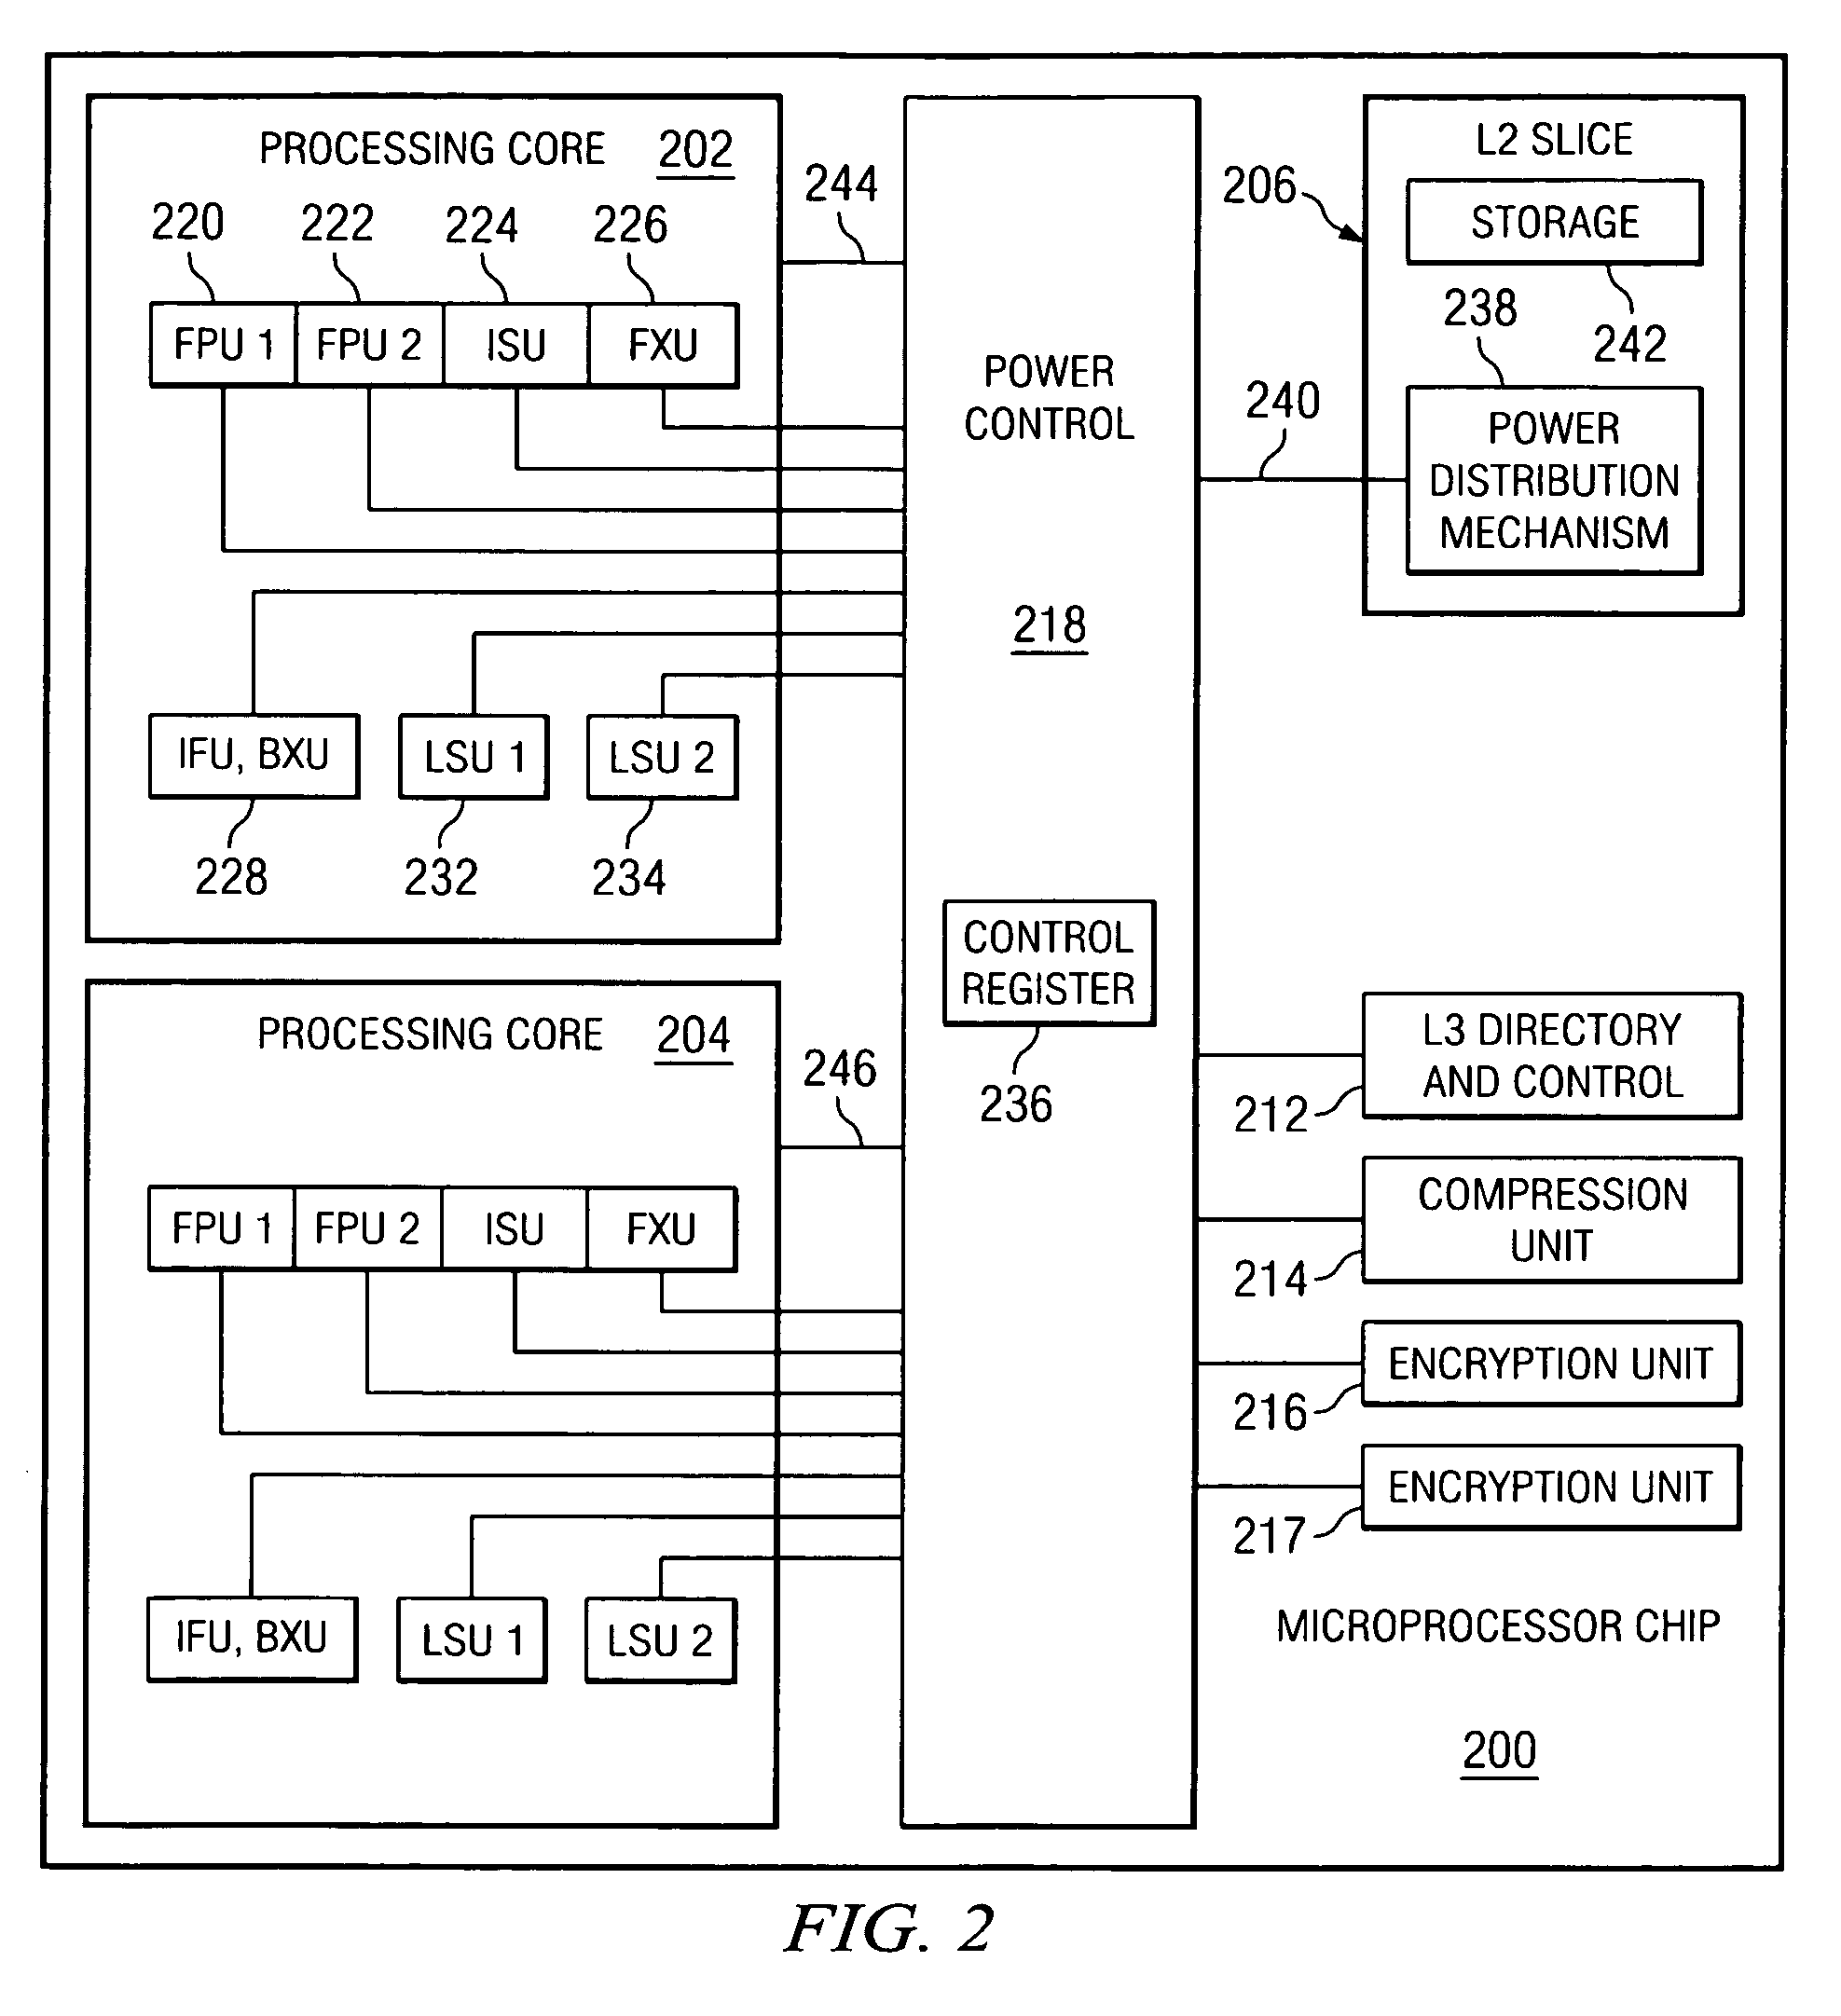 Method for dynamically managing power in microprocessor chips according to present processing demands